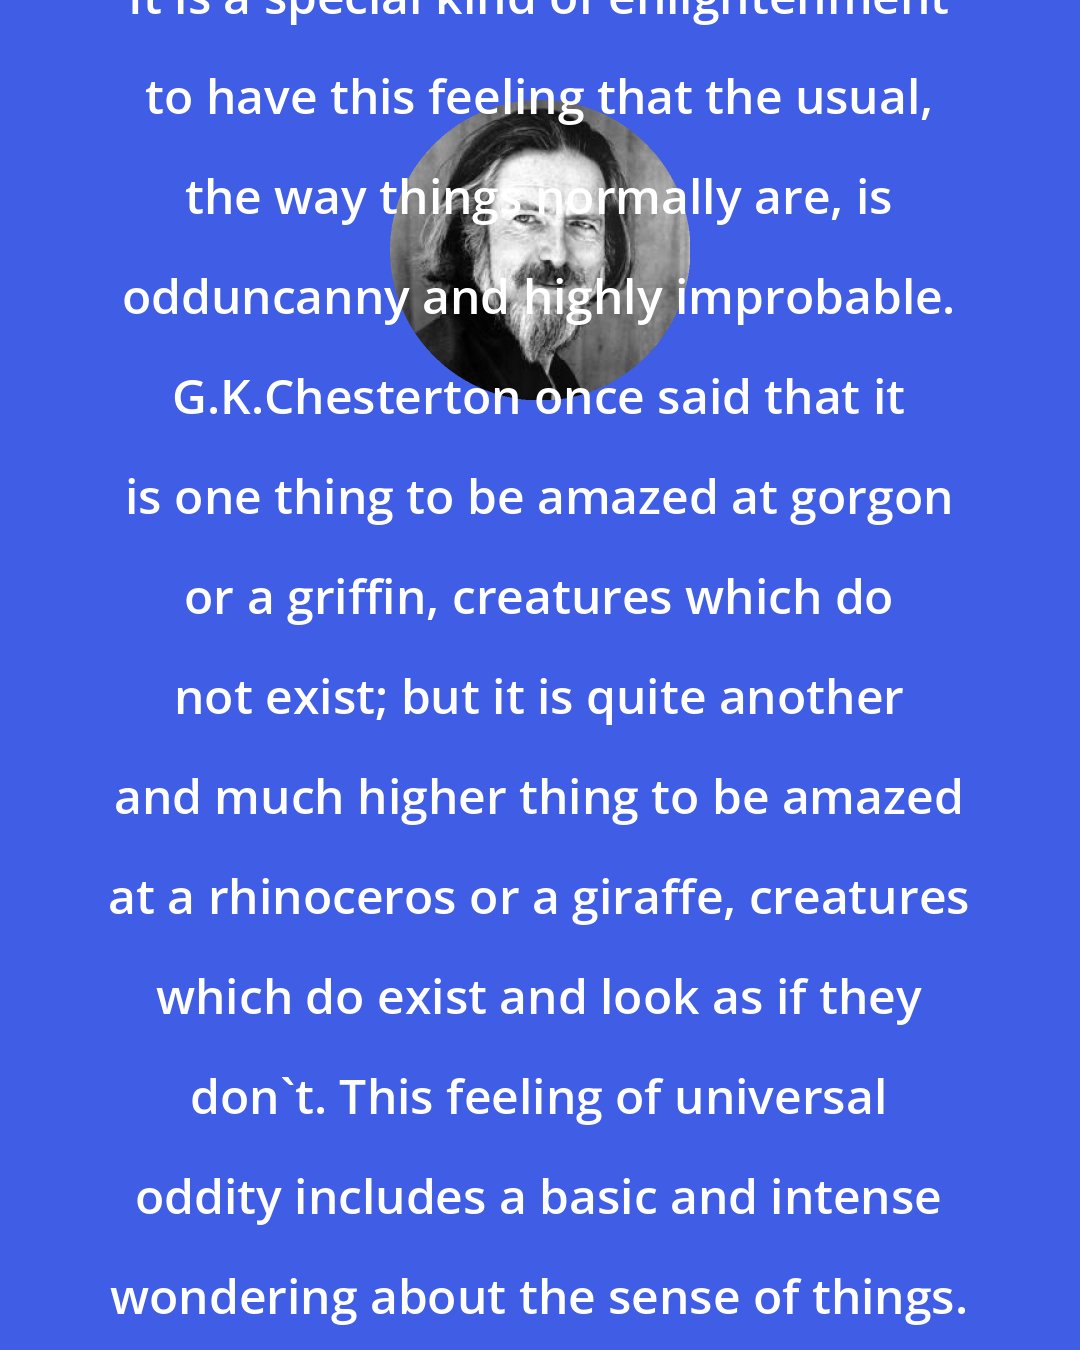 Alan Watts: It is a special kind of enlightenment to have this feeling that the usual, the way things normally are, is odduncanny and highly improbable. G.K.Chesterton once said that it is one thing to be amazed at gorgon or a griffin, creatures which do not exist; but it is quite another and much higher thing to be amazed at a rhinoceros or a giraffe, creatures which do exist and look as if they don't. This feeling of universal oddity includes a basic and intense wondering about the sense of things.